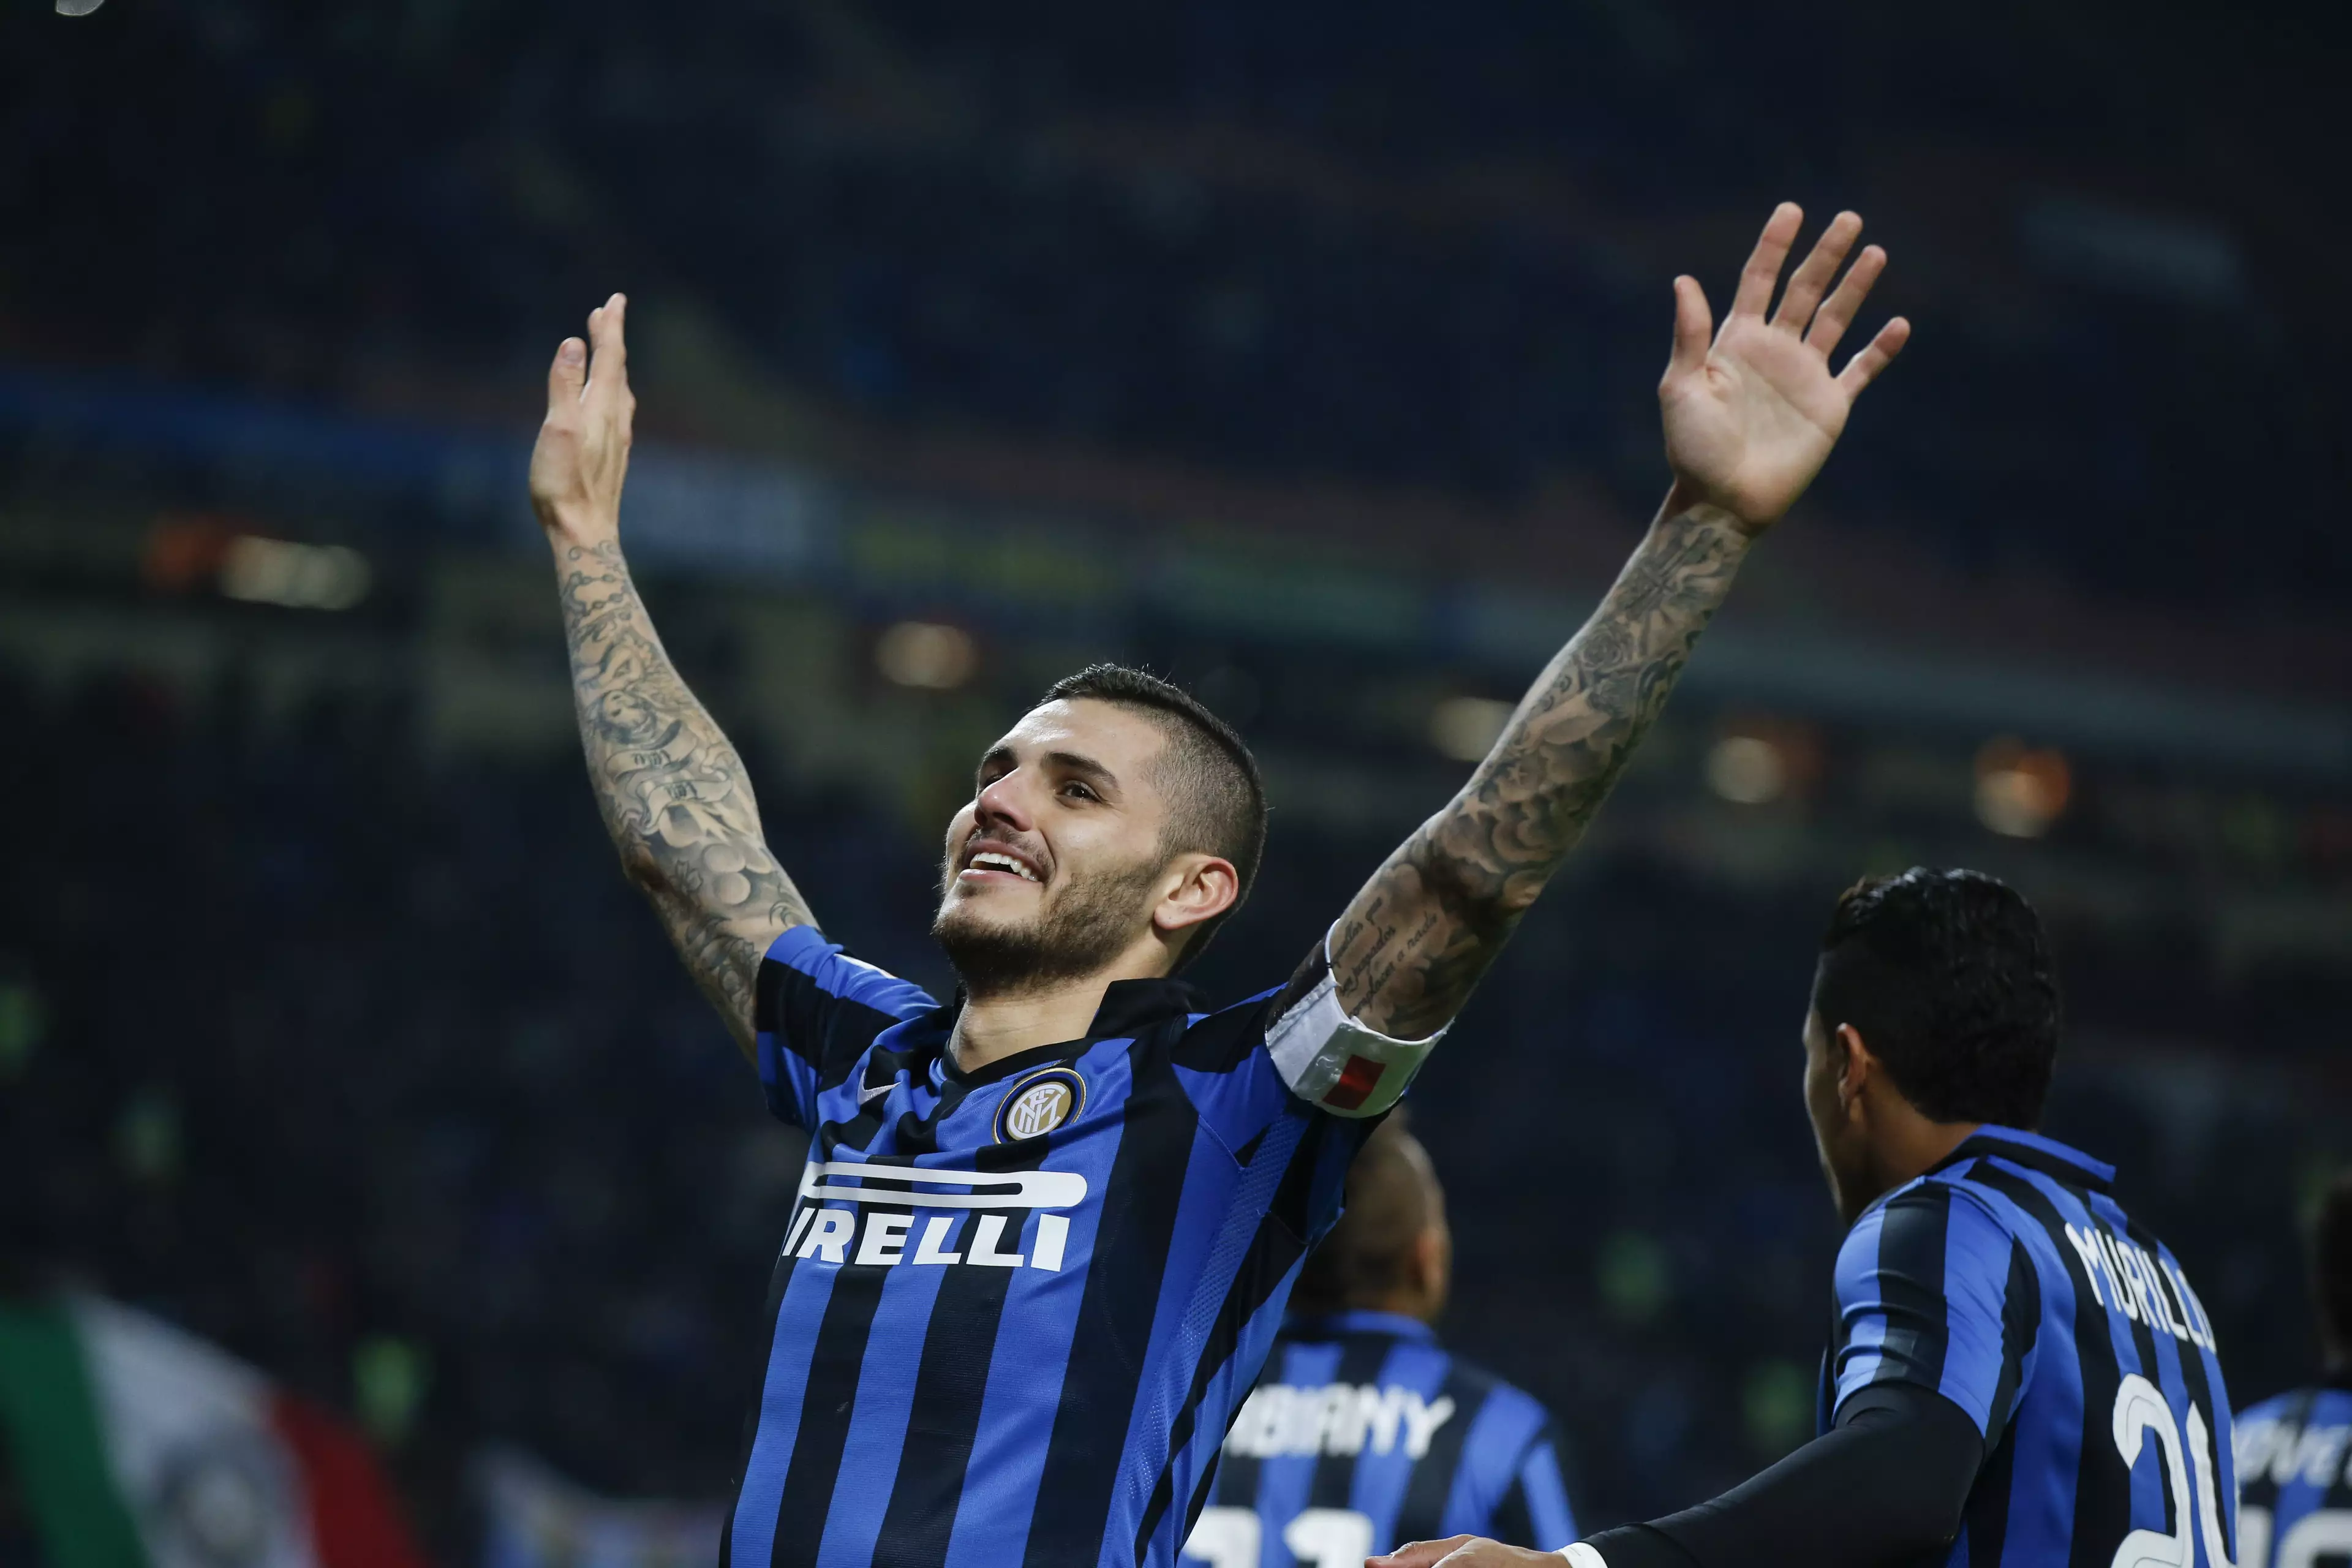 Icardi is one of the best strikers in the world. Image: PA Images